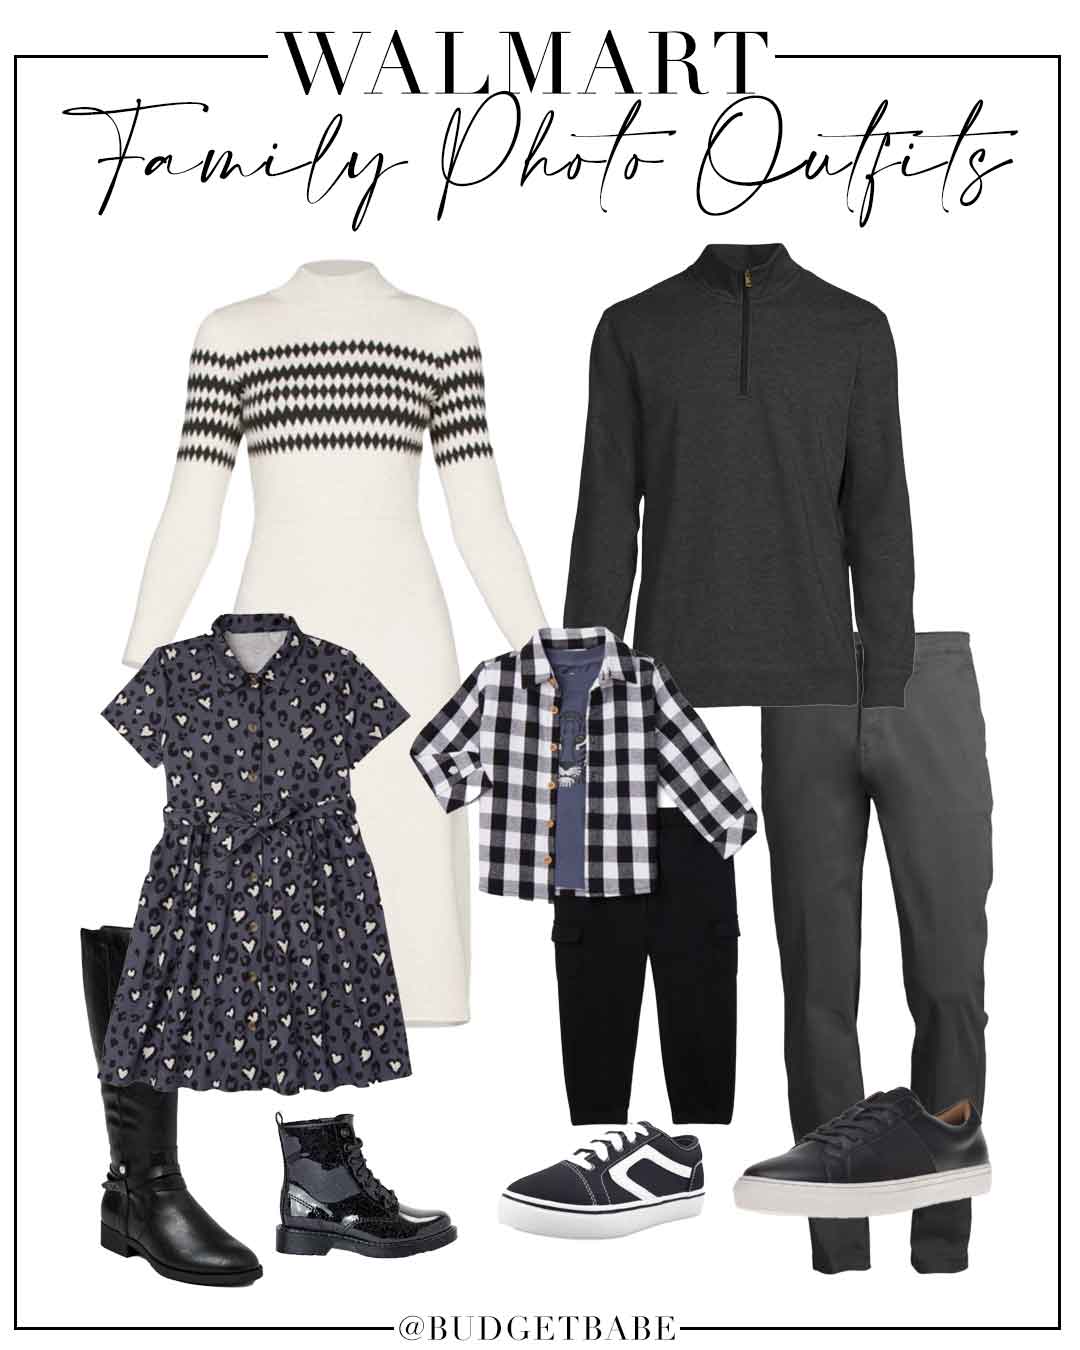 Walmart Family Matching Outfit Ideas and Inspiration for Holiday, Family Photos, Christmas, Matching Pajamas!